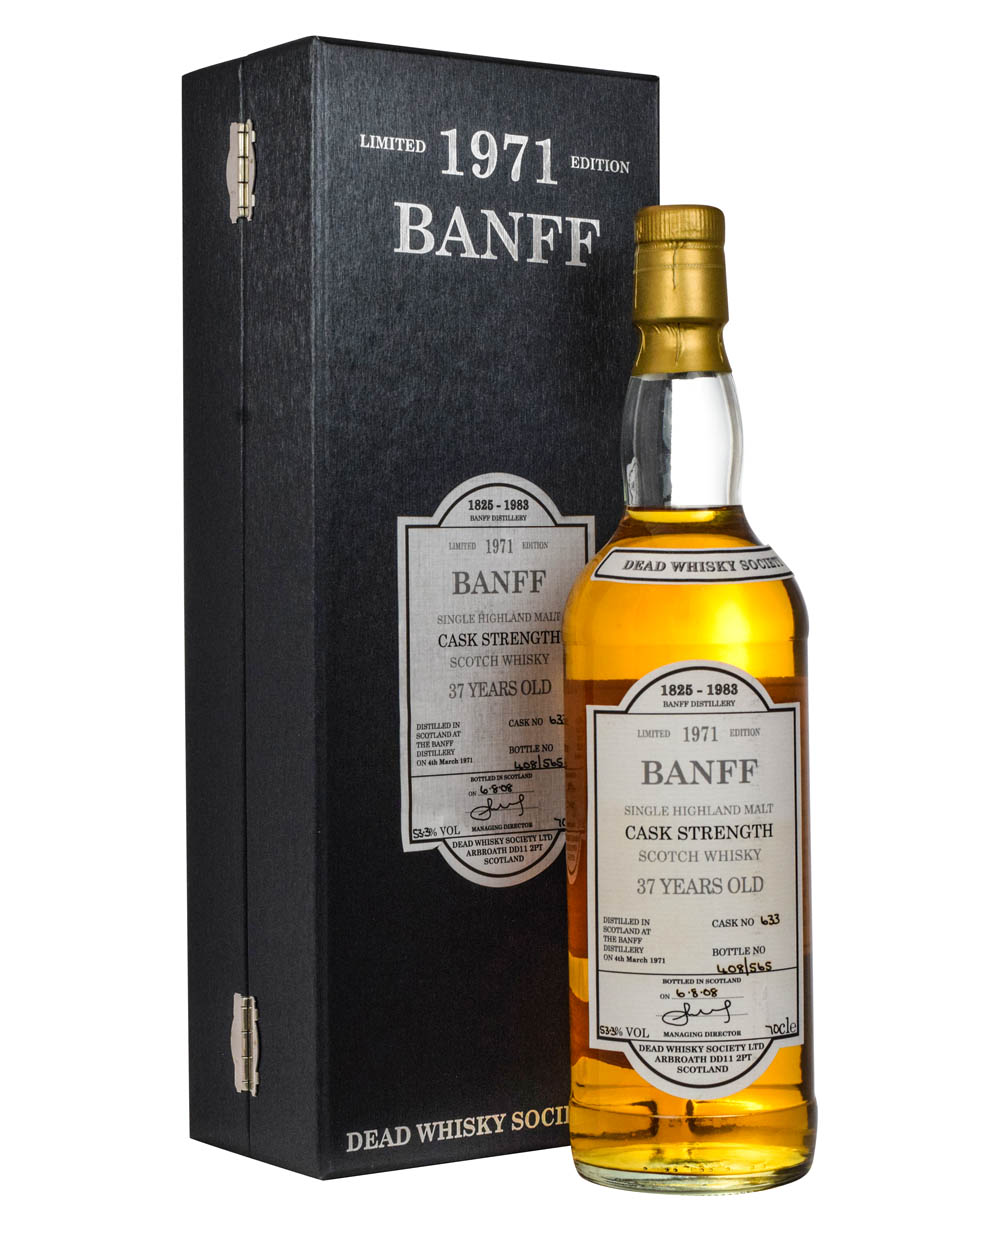 Banff 37 Years Old Dead Whisky Society 1971 Cask #633 Box